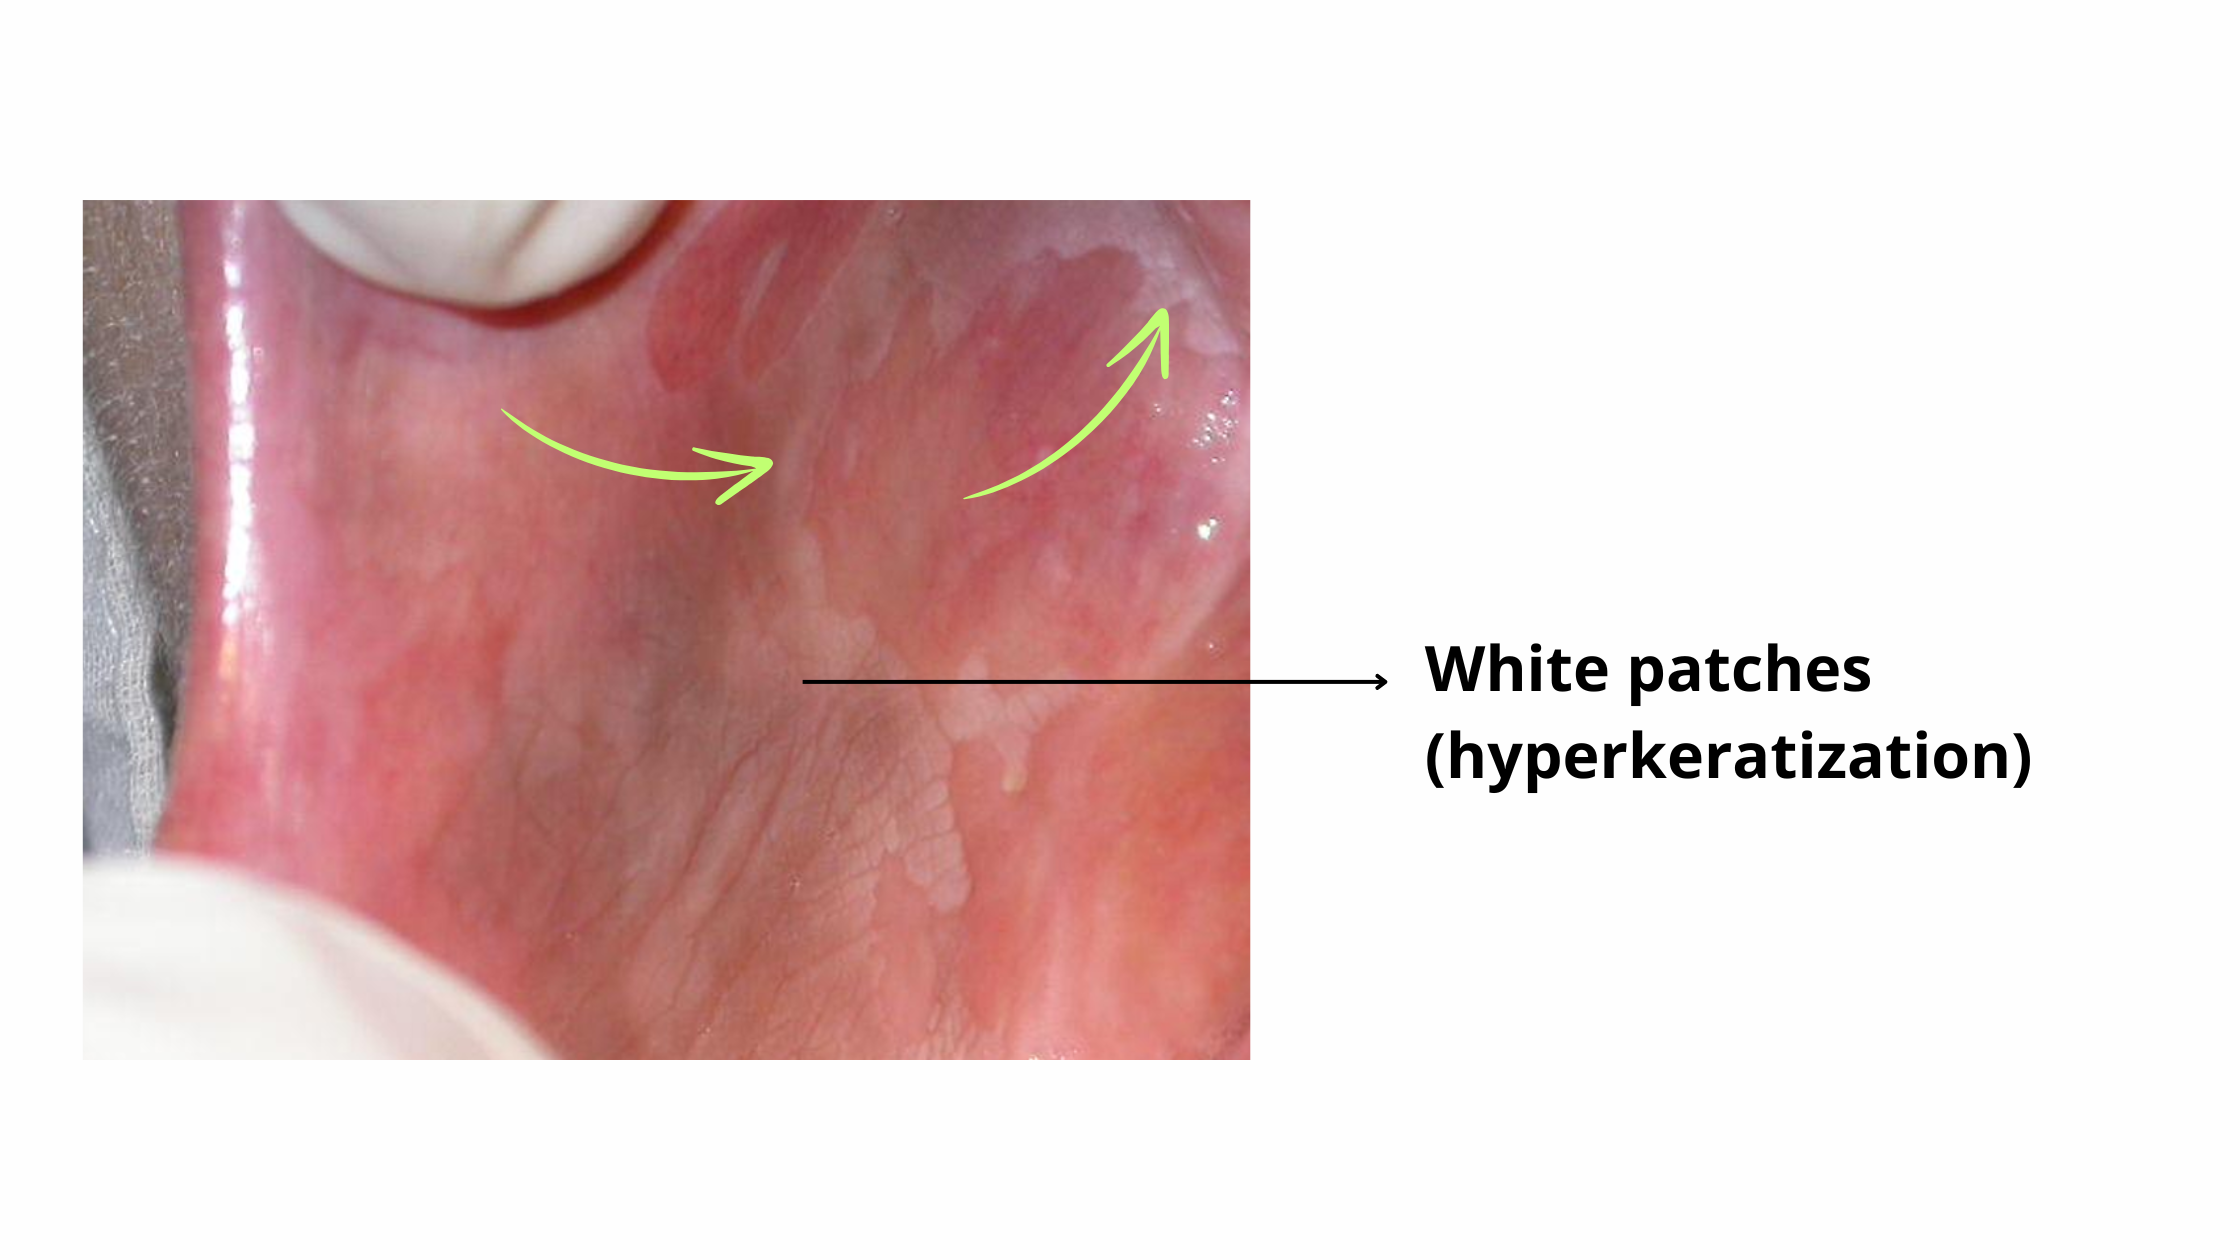 White patches of hyperkeratinization due to chronic irritation on the inside of the cheek